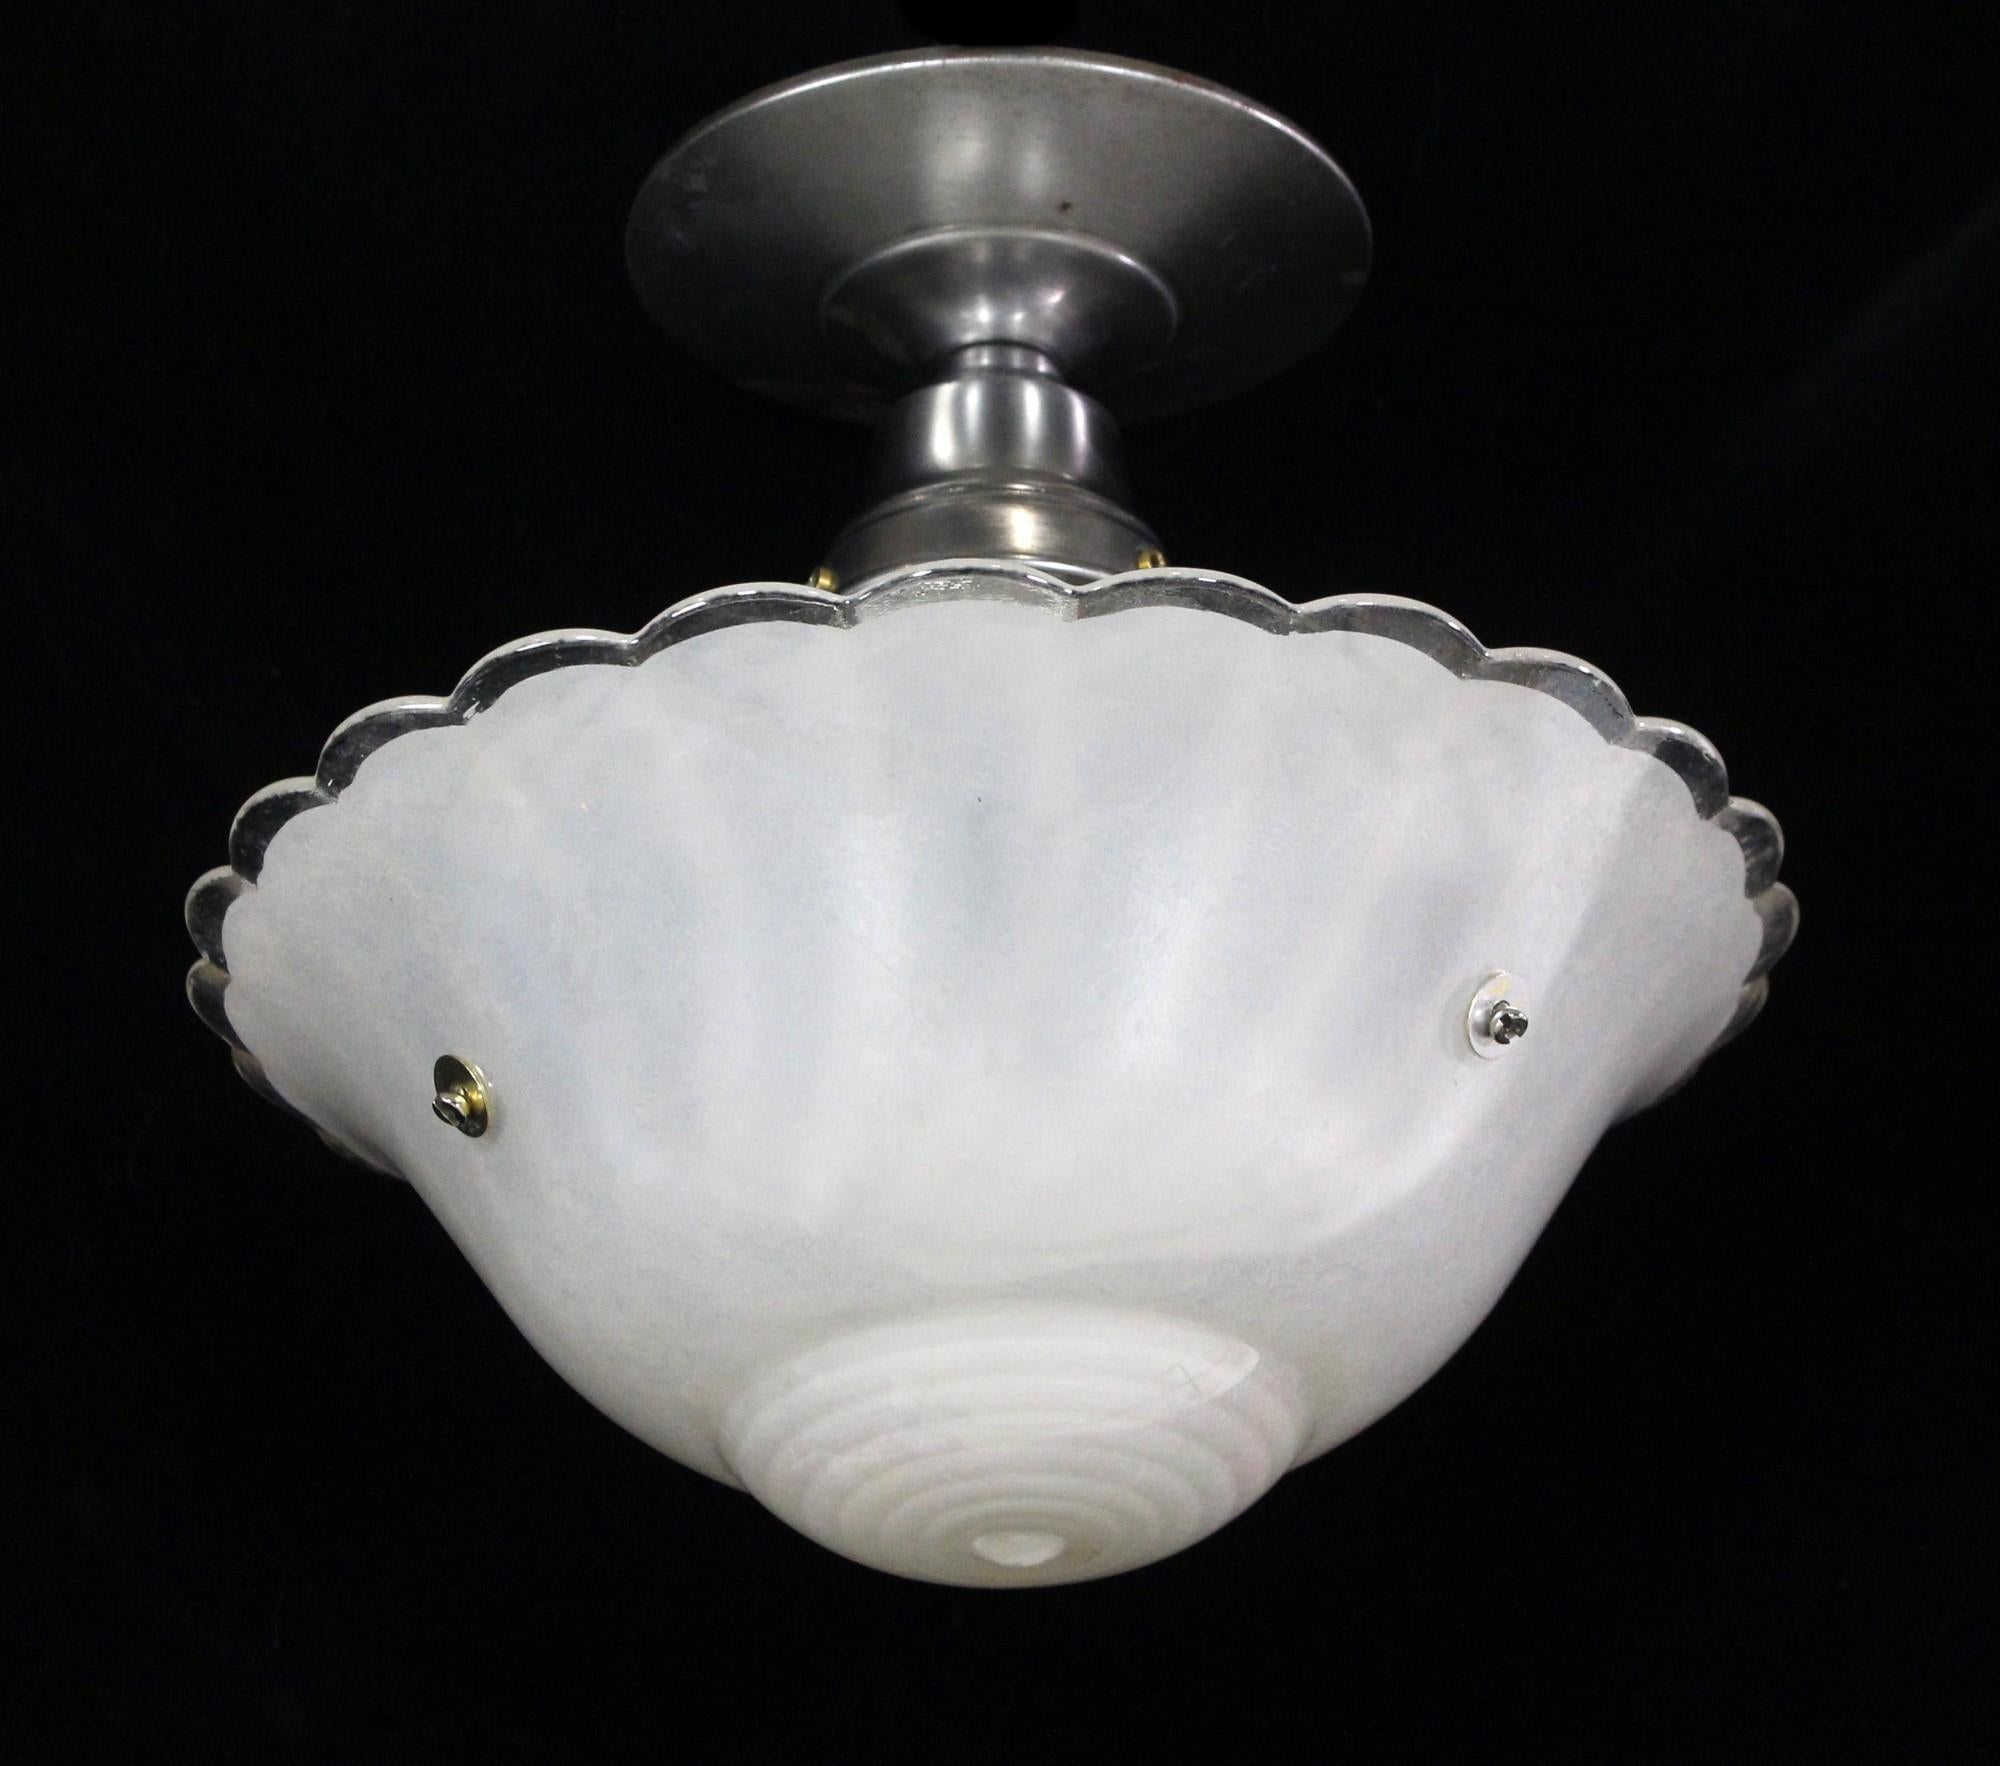 1940s white cast glass shade showing off an iridescent glow and mounted to a new nickel plated semi flush mount pendant light fixture. Takes one E26 light bulb. This can be seen at our 400 Gilligan St location in Scranton, PA.